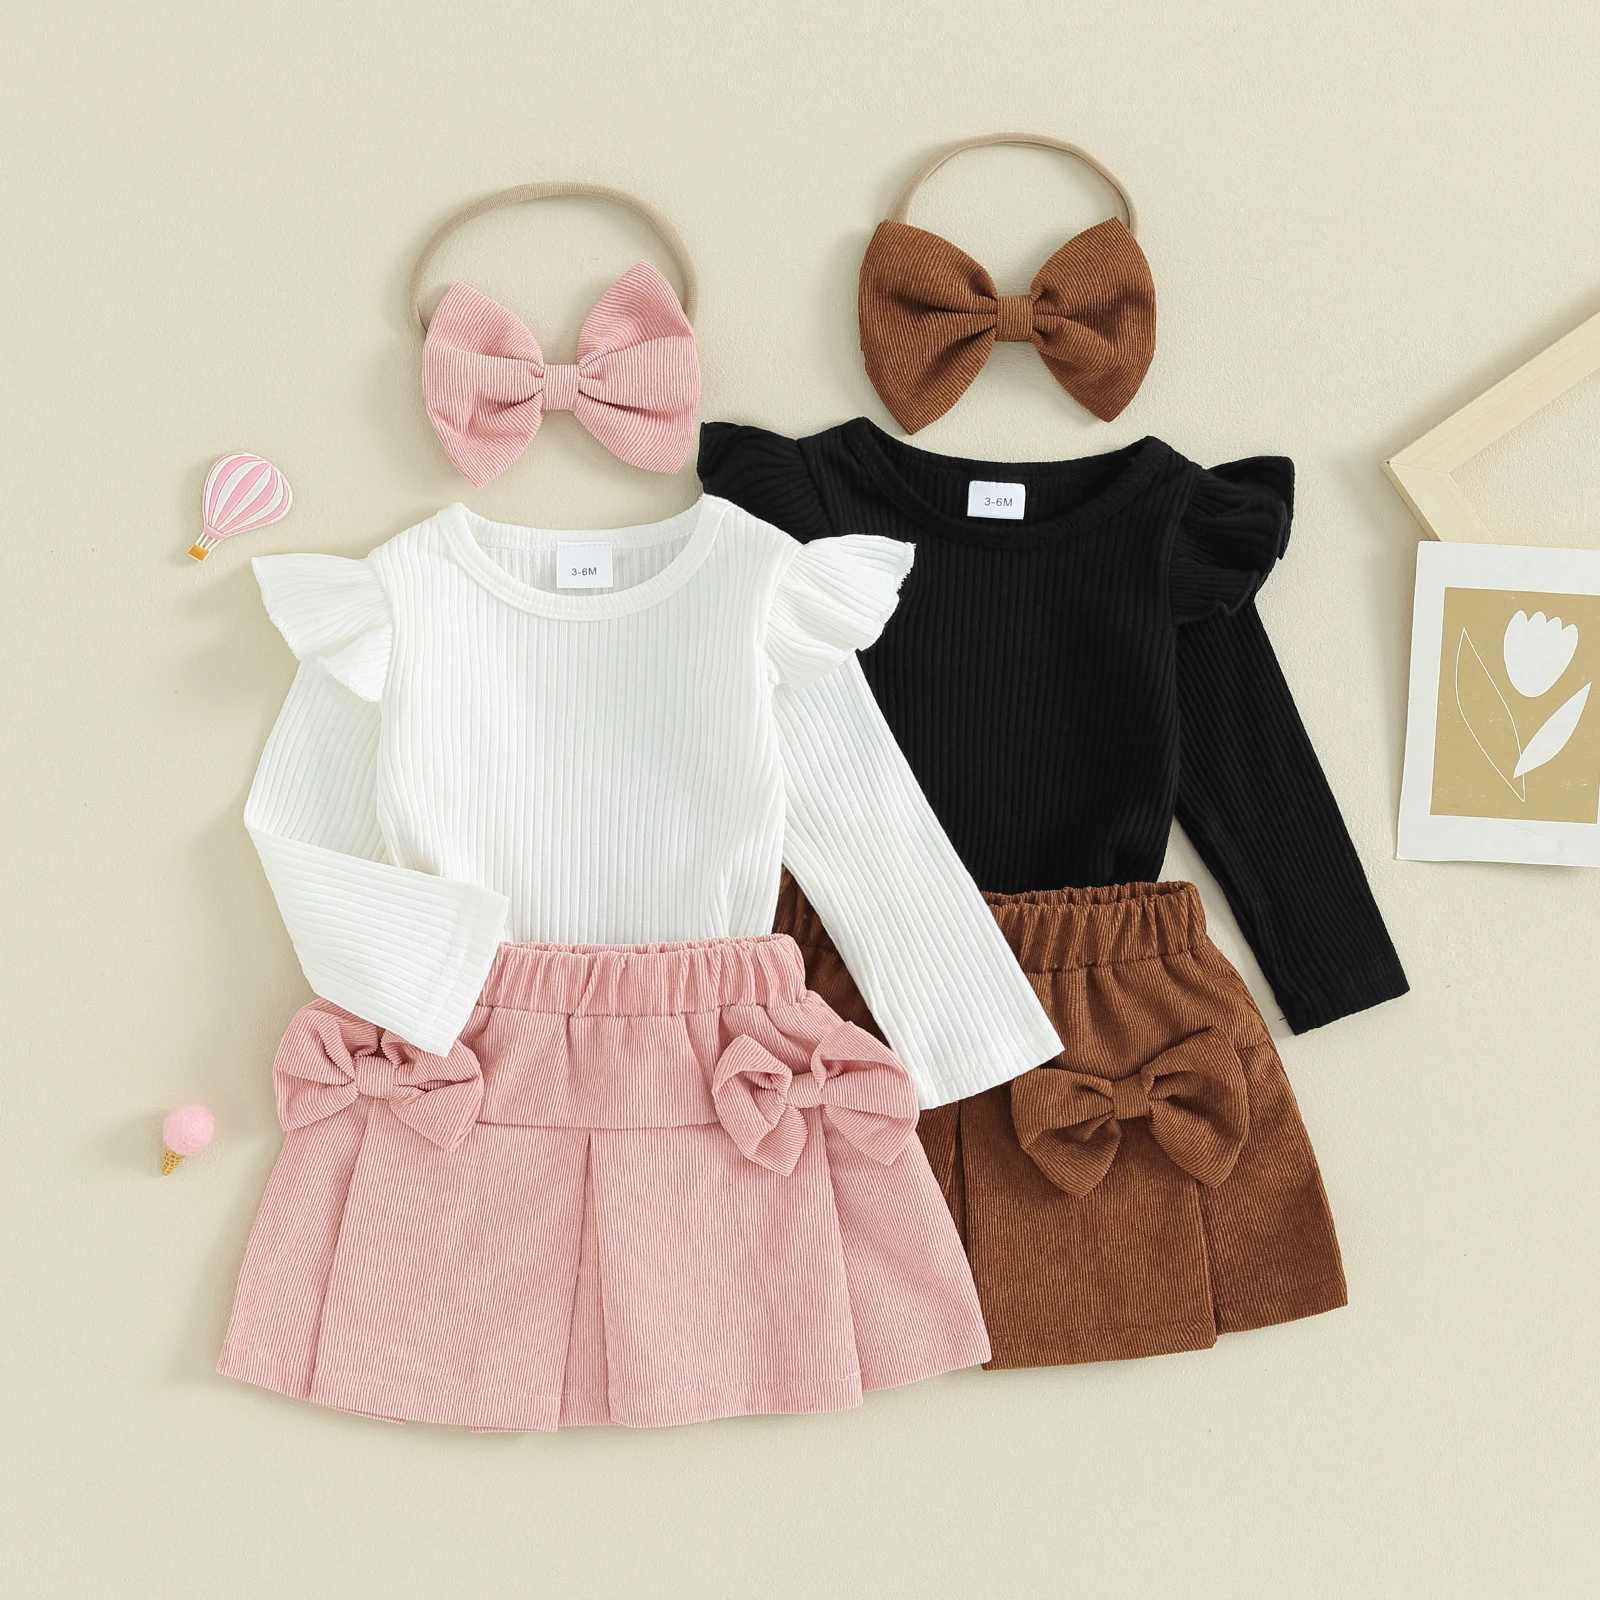 Kids Toddler Baby Girl Long Sleeve Pleated Skirt Set Ruffle Knit Tops with  Bowknot and Mini Skirt Fall Spring Outfits - Walmart.com